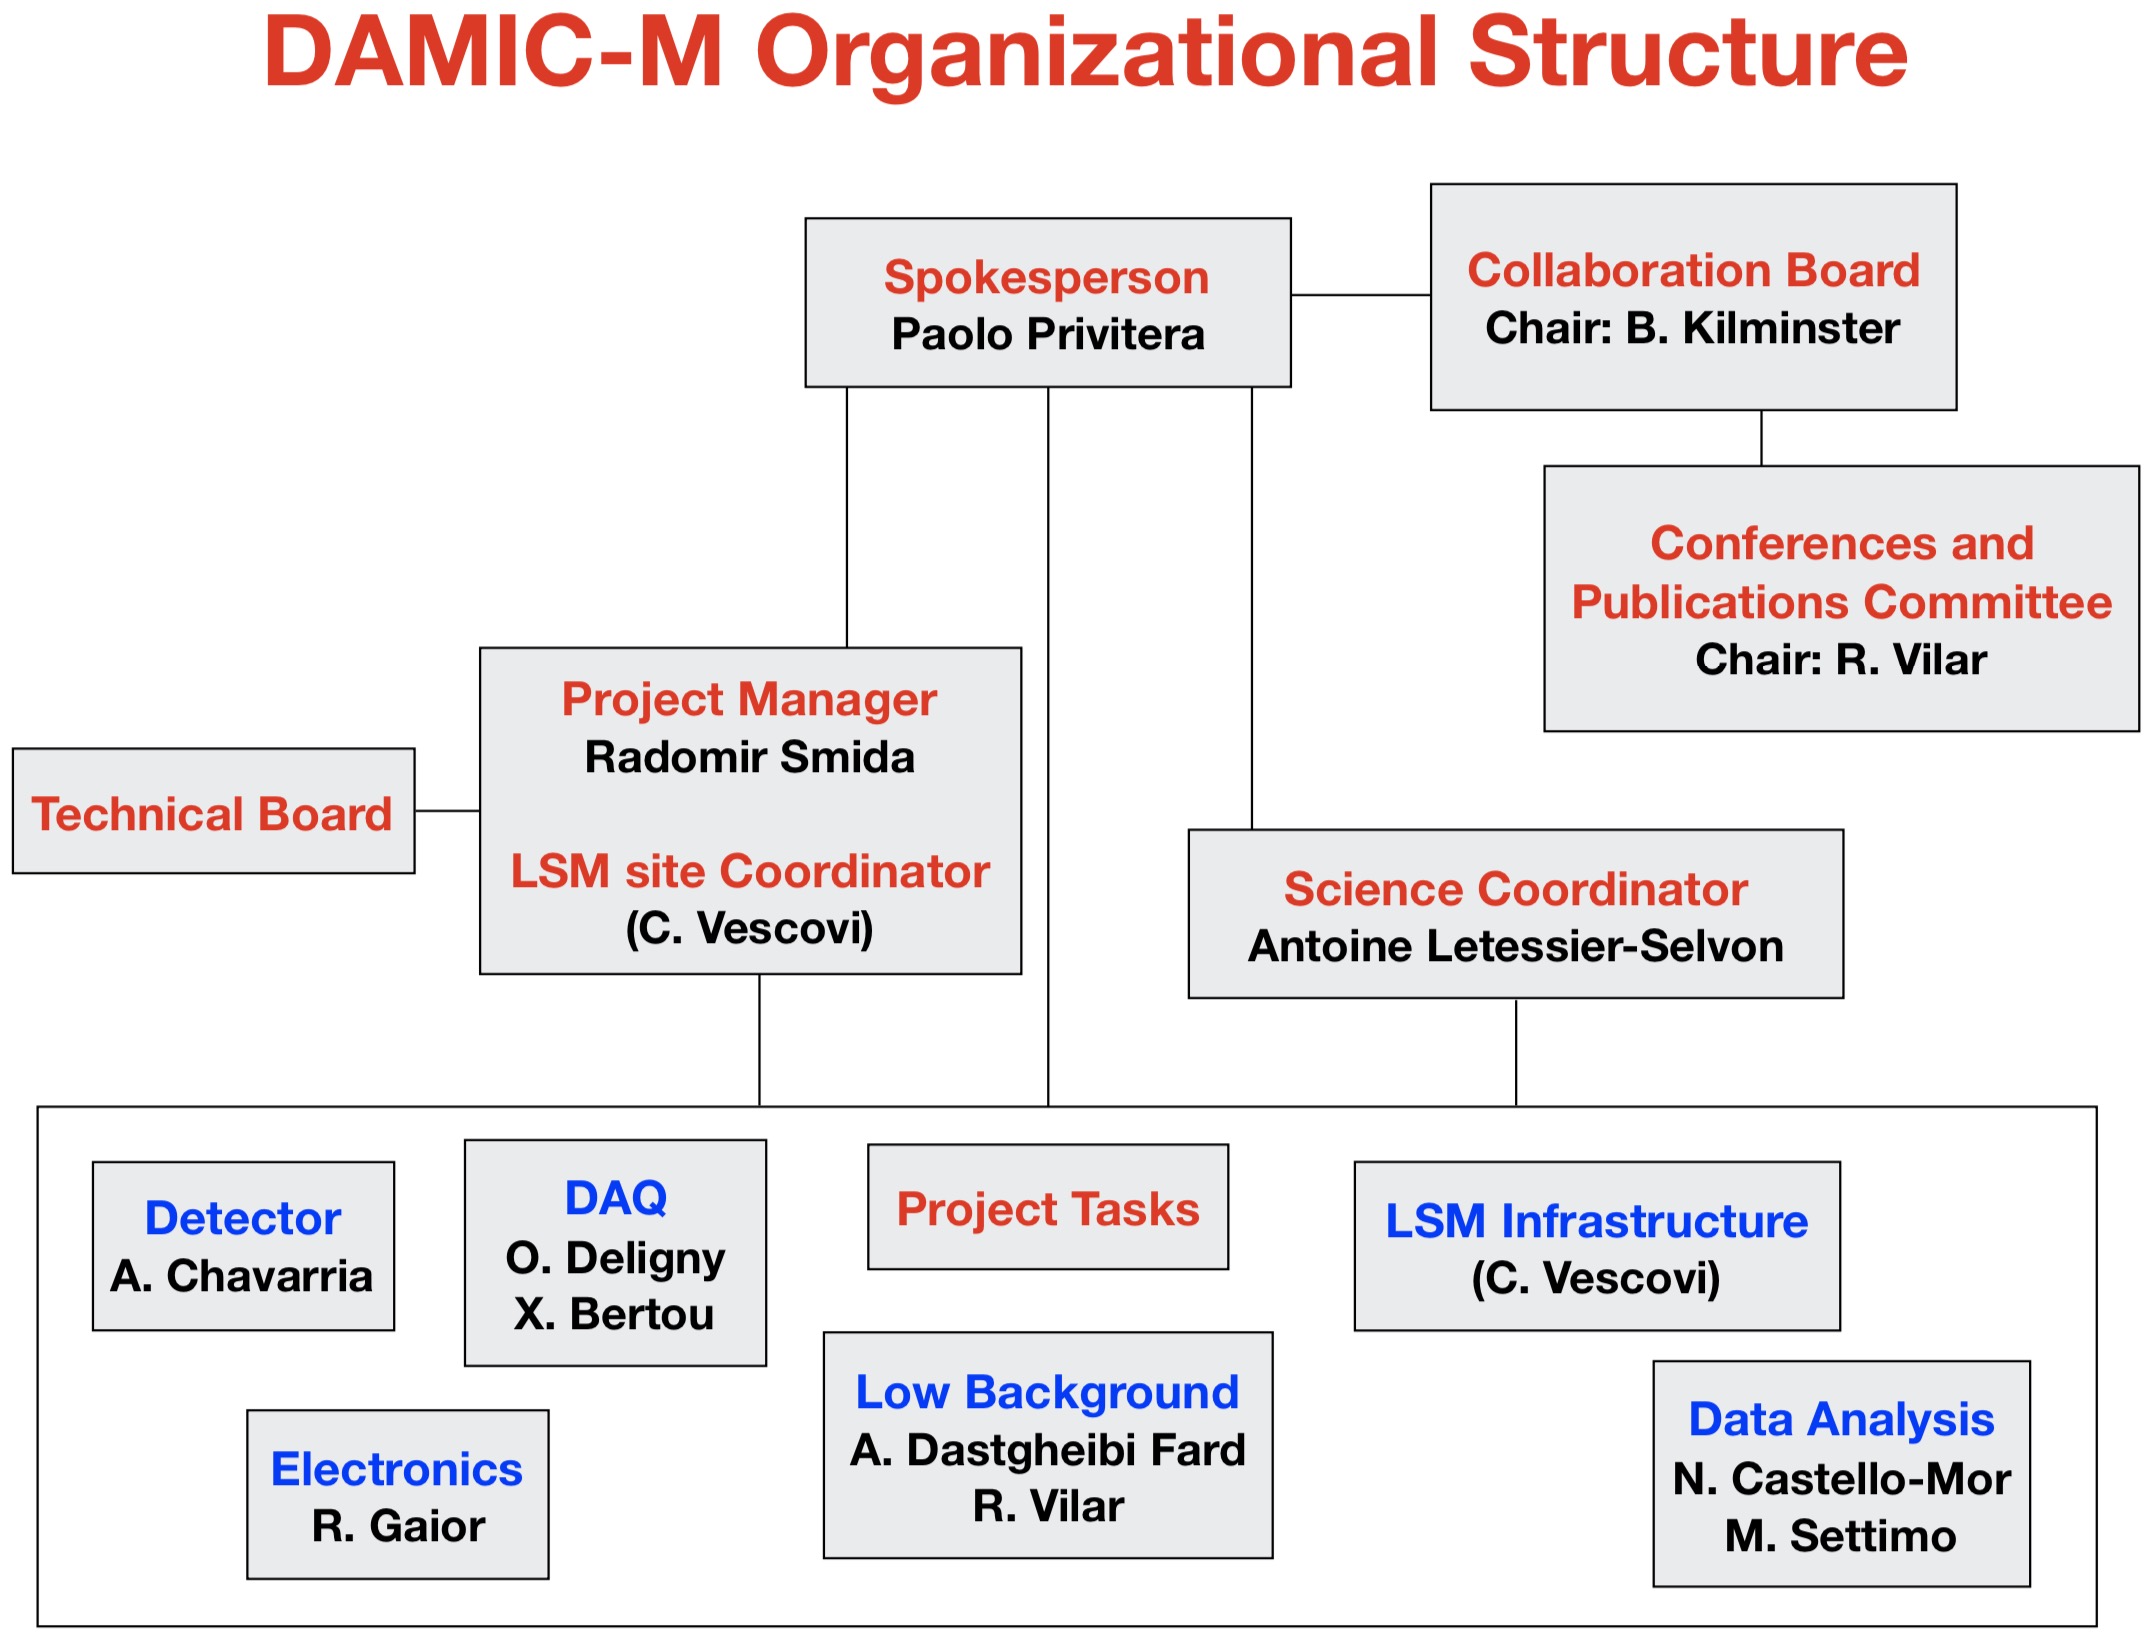 Picture: Organizational Structure